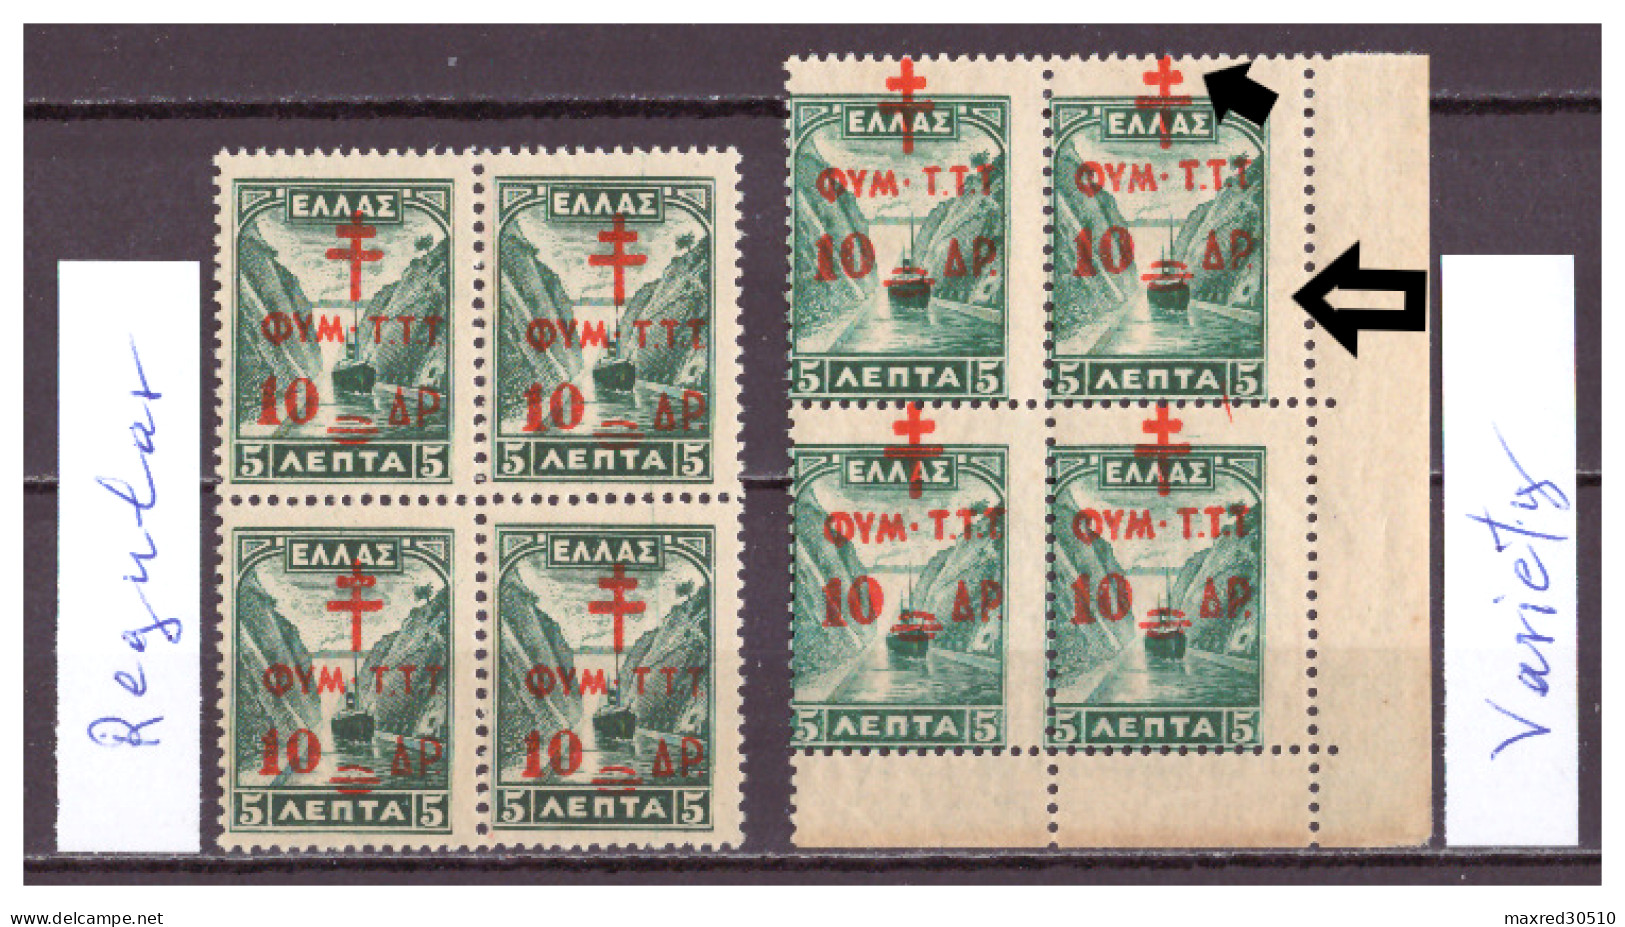 GREECE 1942/43 CHARITY 2 SAME BLOCKS OF 4X10DR./5L. OF "STAMPS OF 1927 LANDSCAPES WITH RED OVPT" WITH VARIETIES MNH - Errors, Freaks & Oddities (EFO)